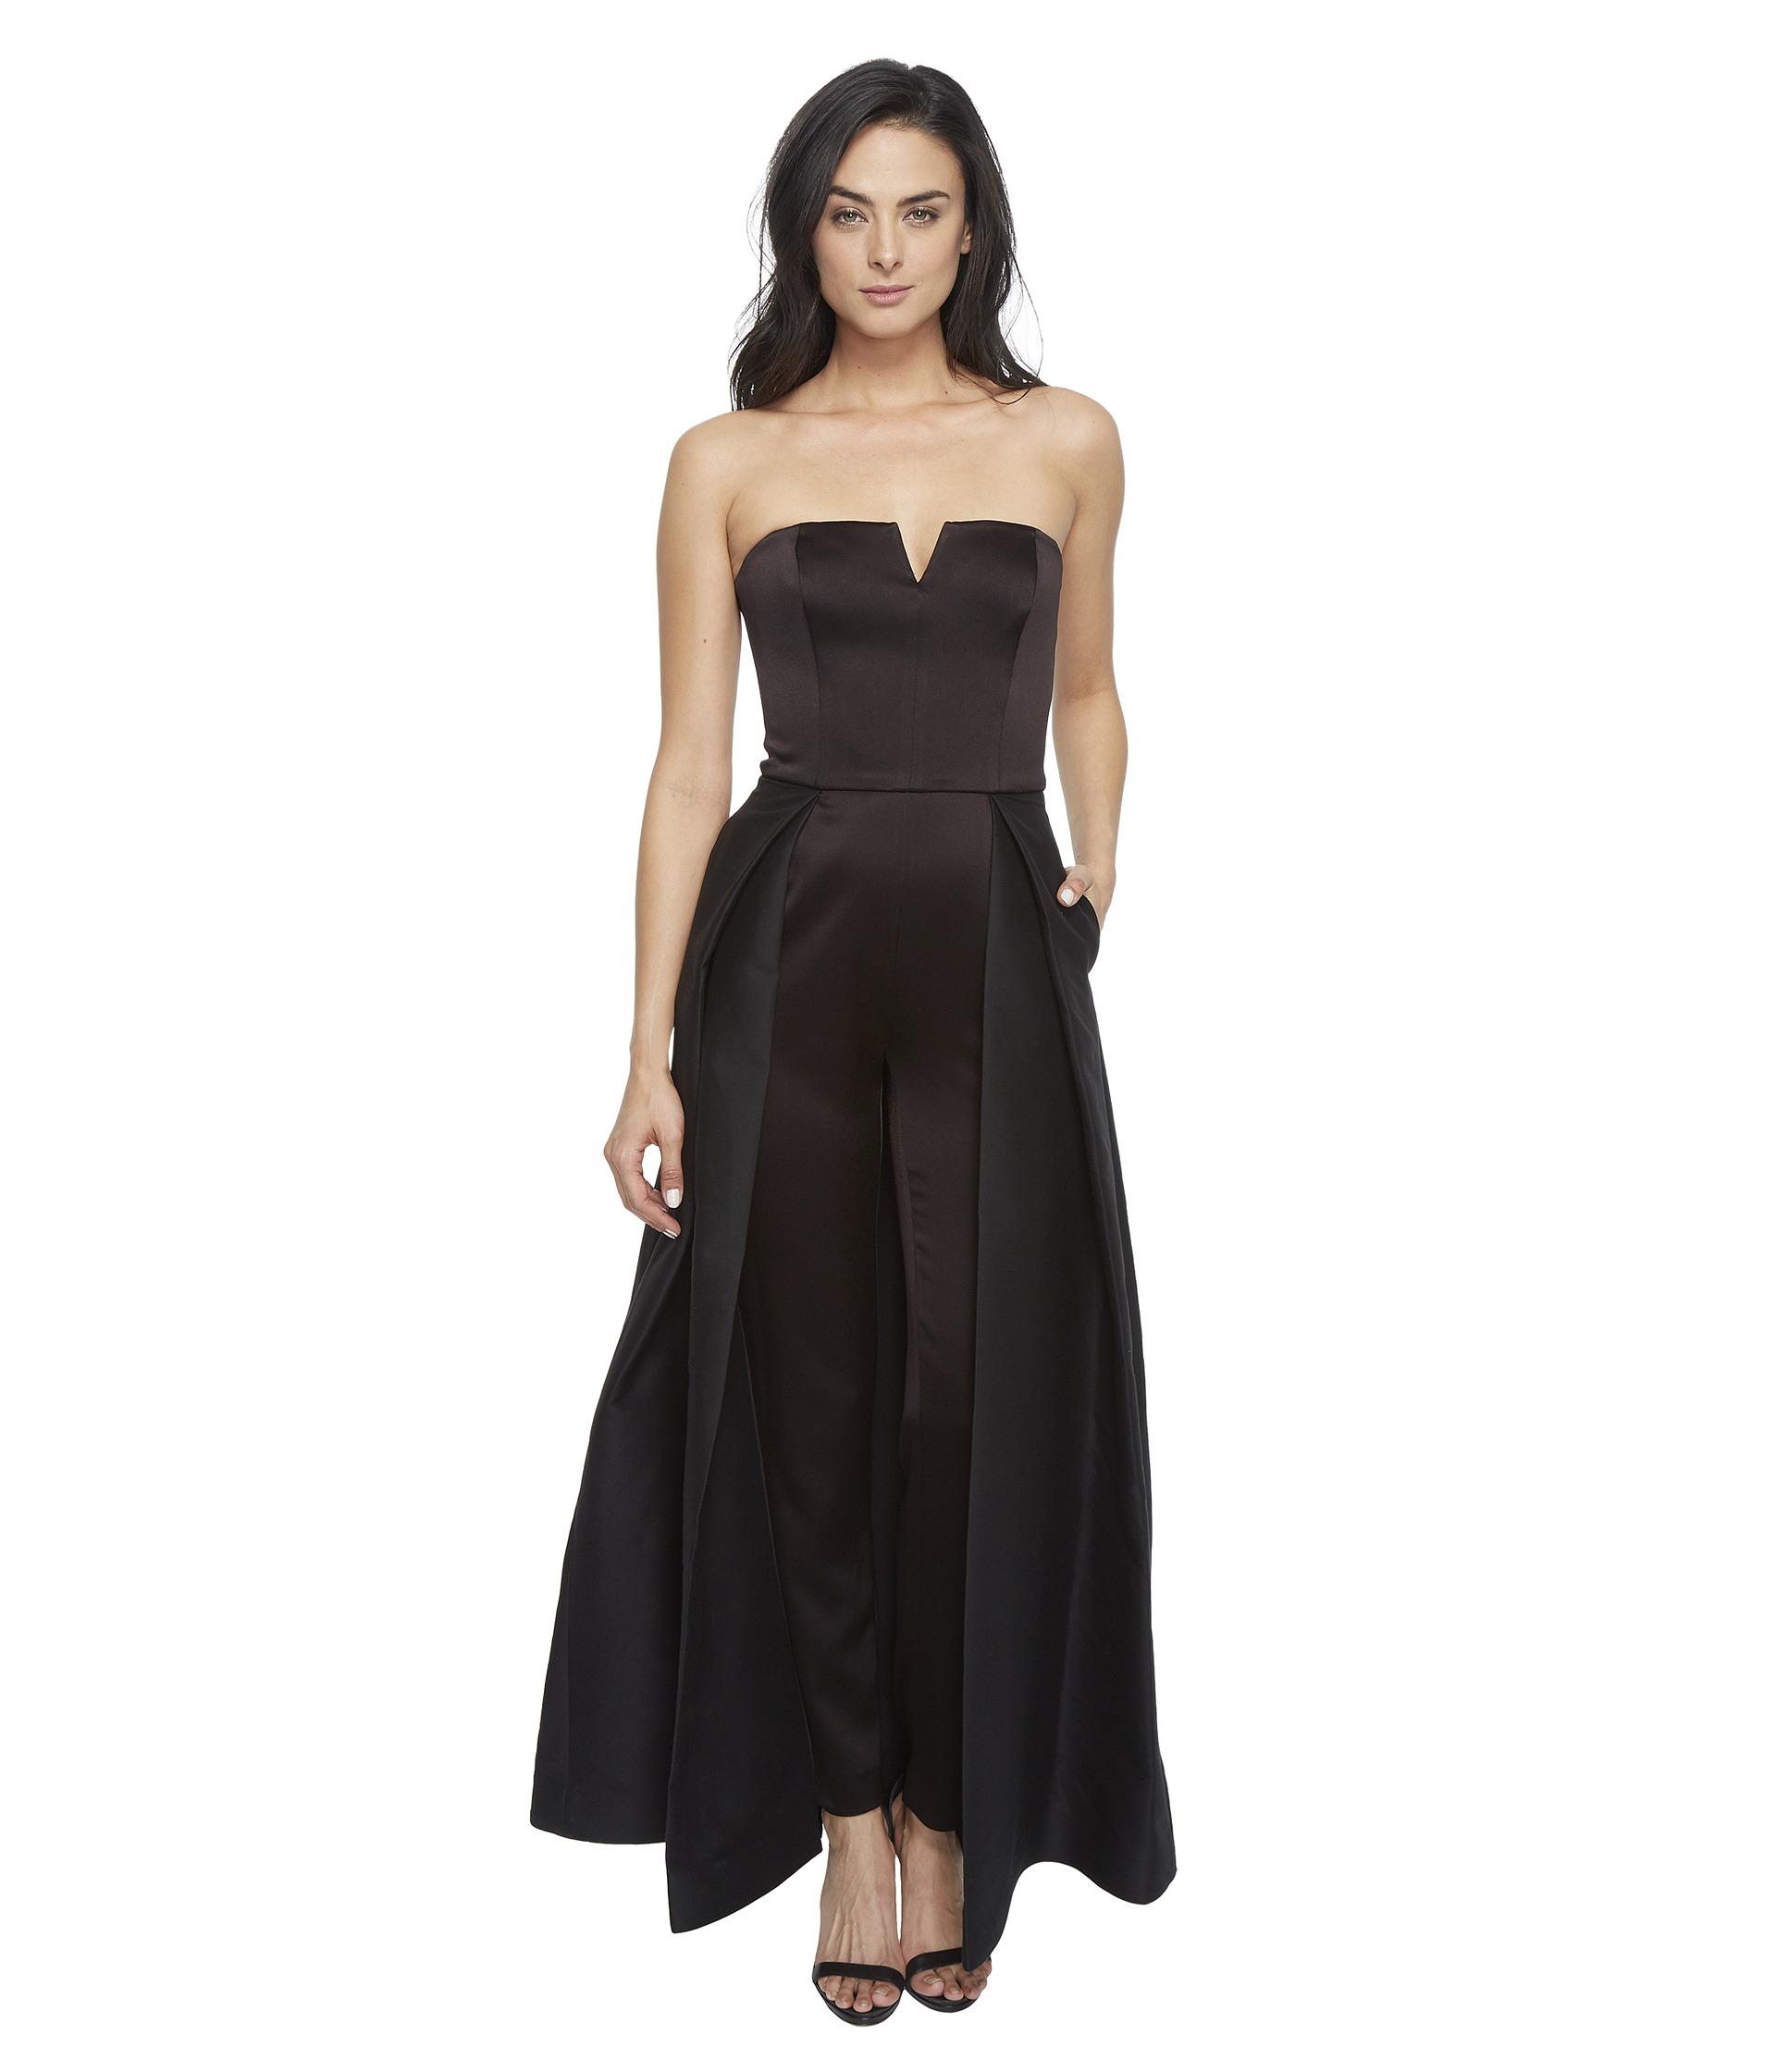 Lyst - Halston Strapless Jumpsuit With Structured Skirt Overlay in Black